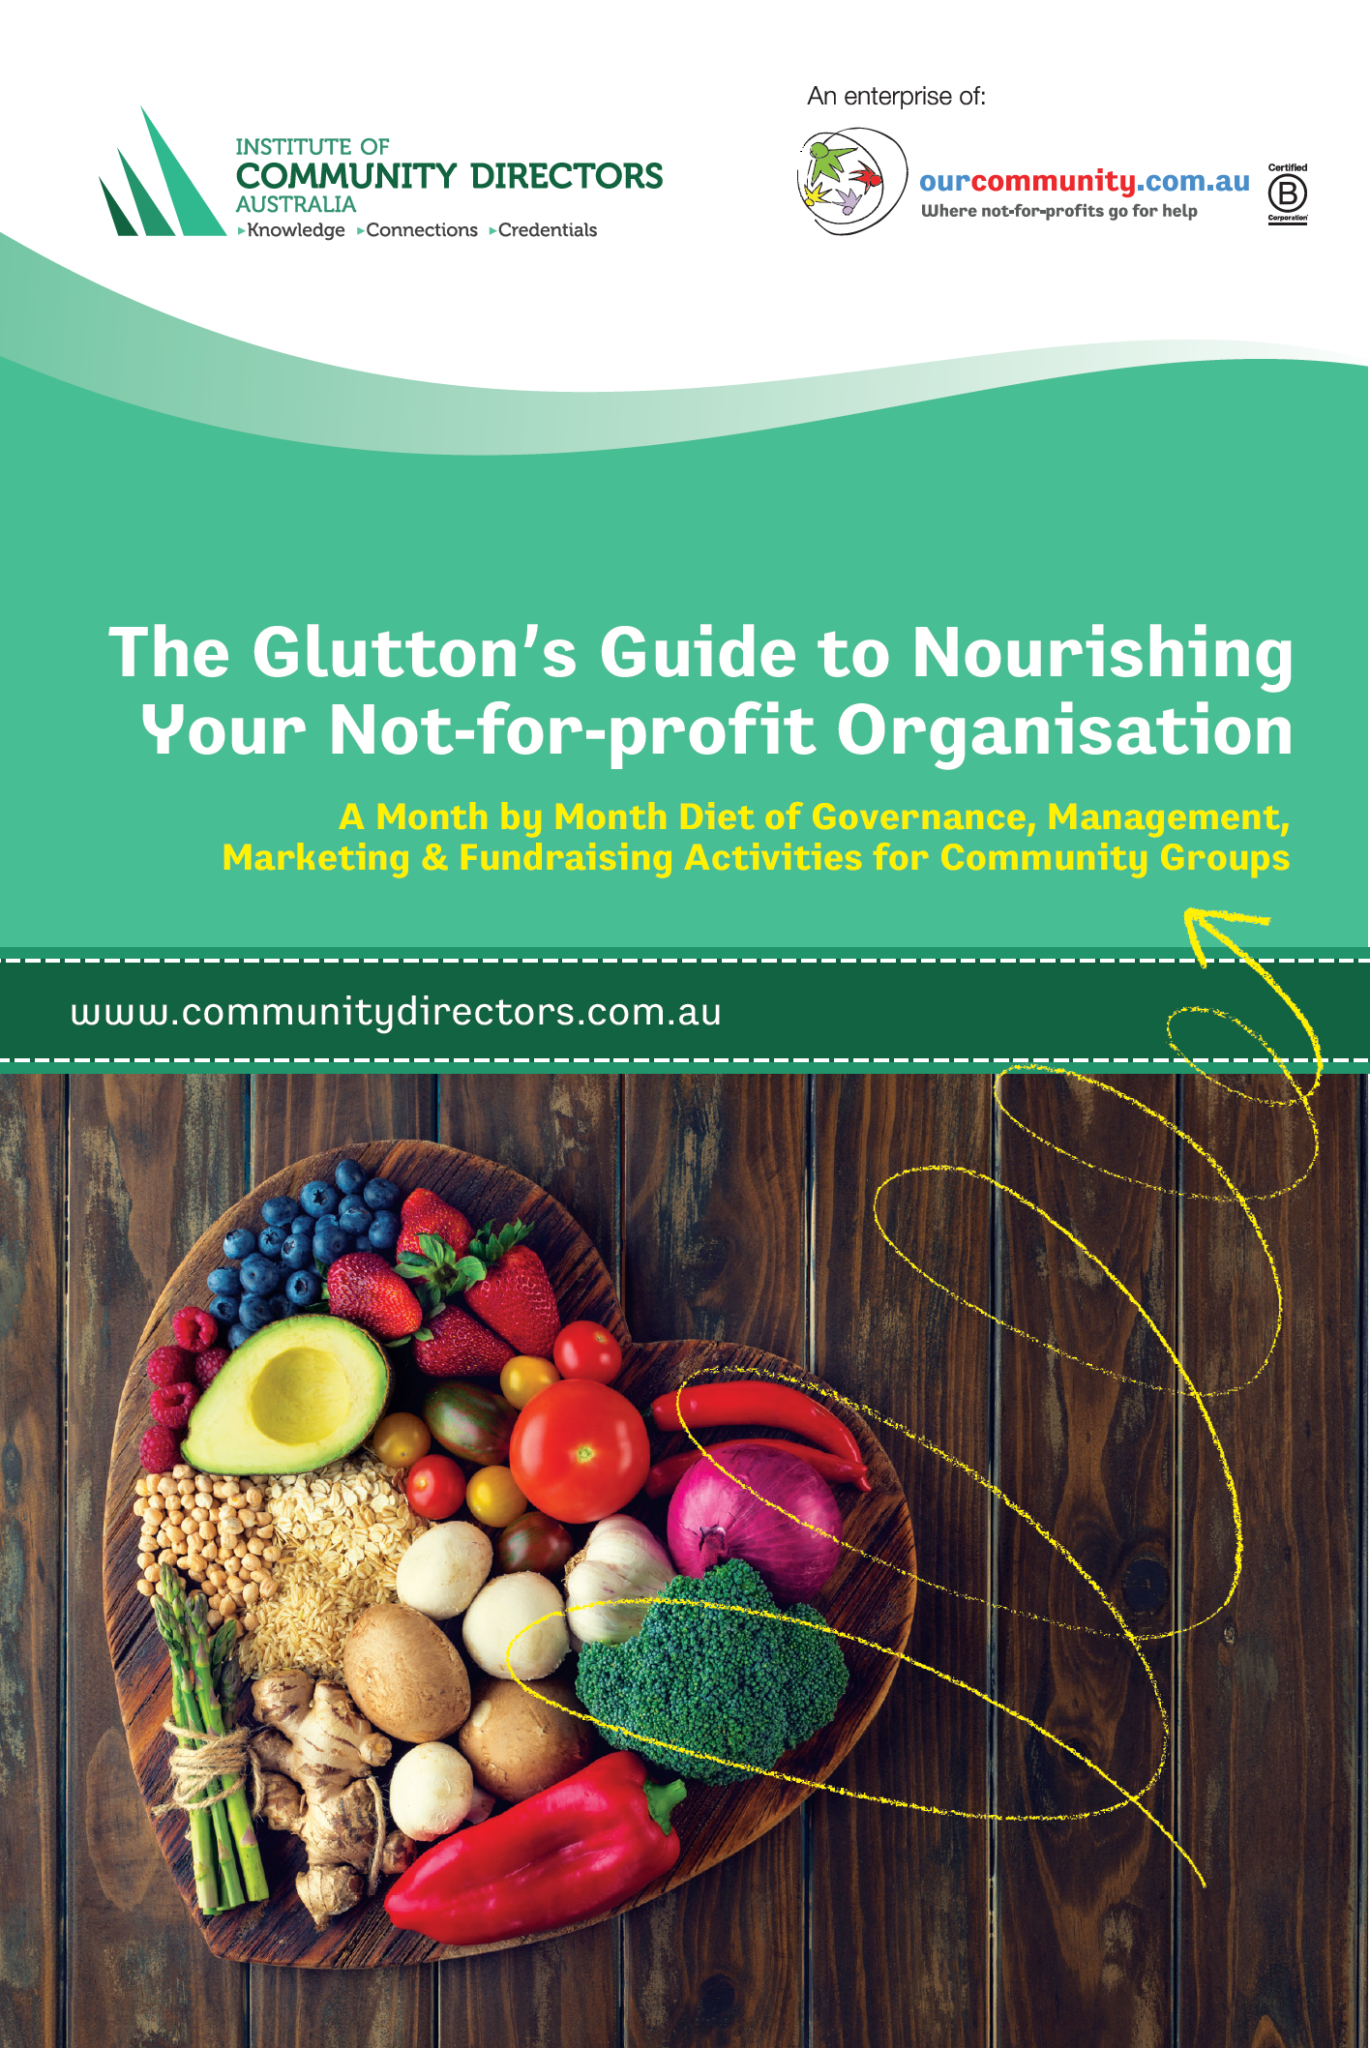 The Glutton's Guide to Nourishing Your Not-for-Profit Organisation